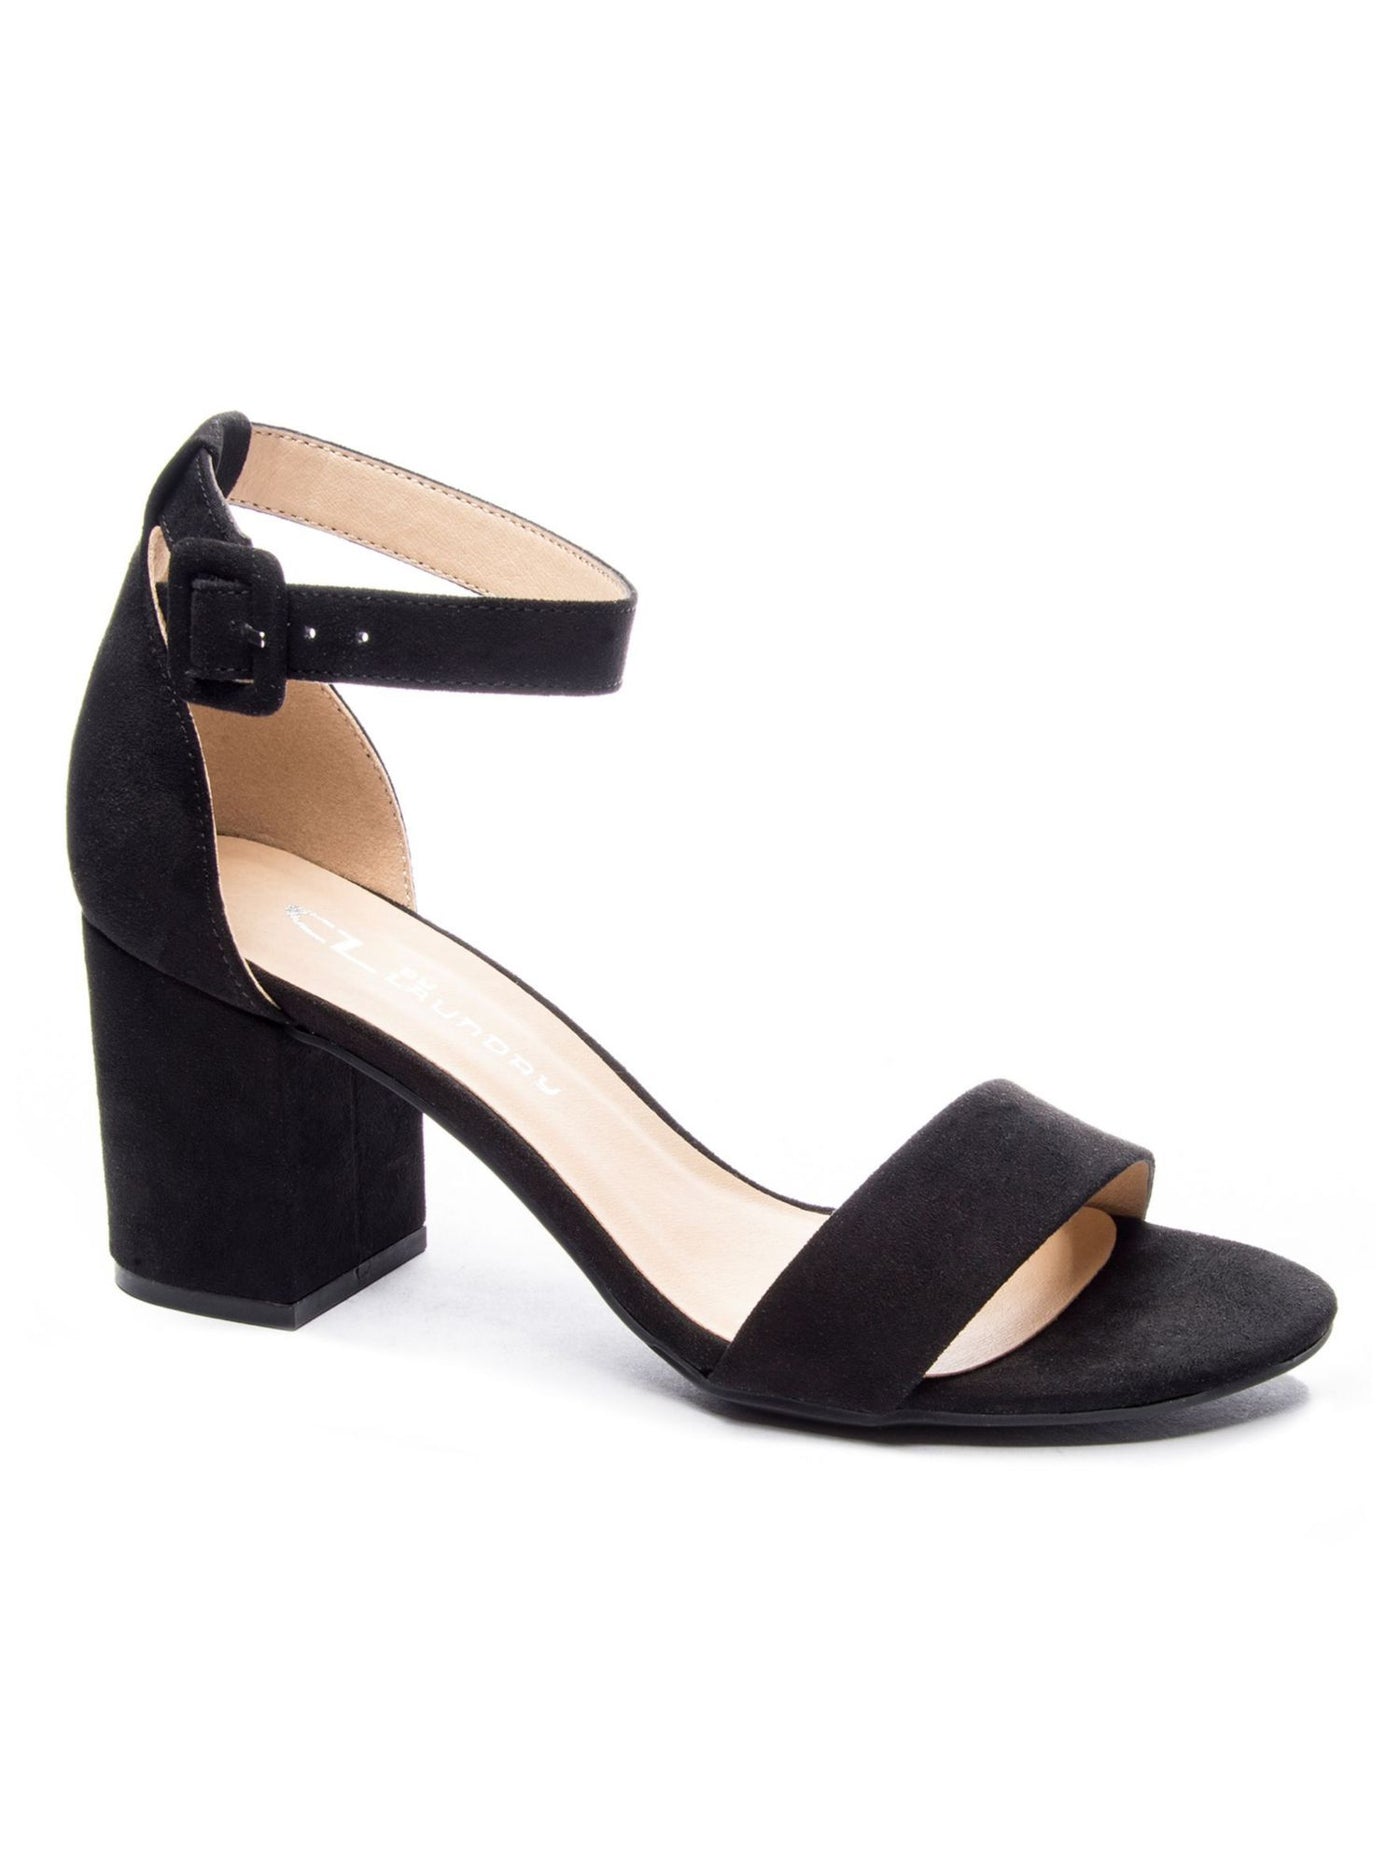 CL BY LAUNDRY Womens Black Ankle Strap Padded Jody Round Toe Block Heel Buckle Heeled Sandal 8.5 M